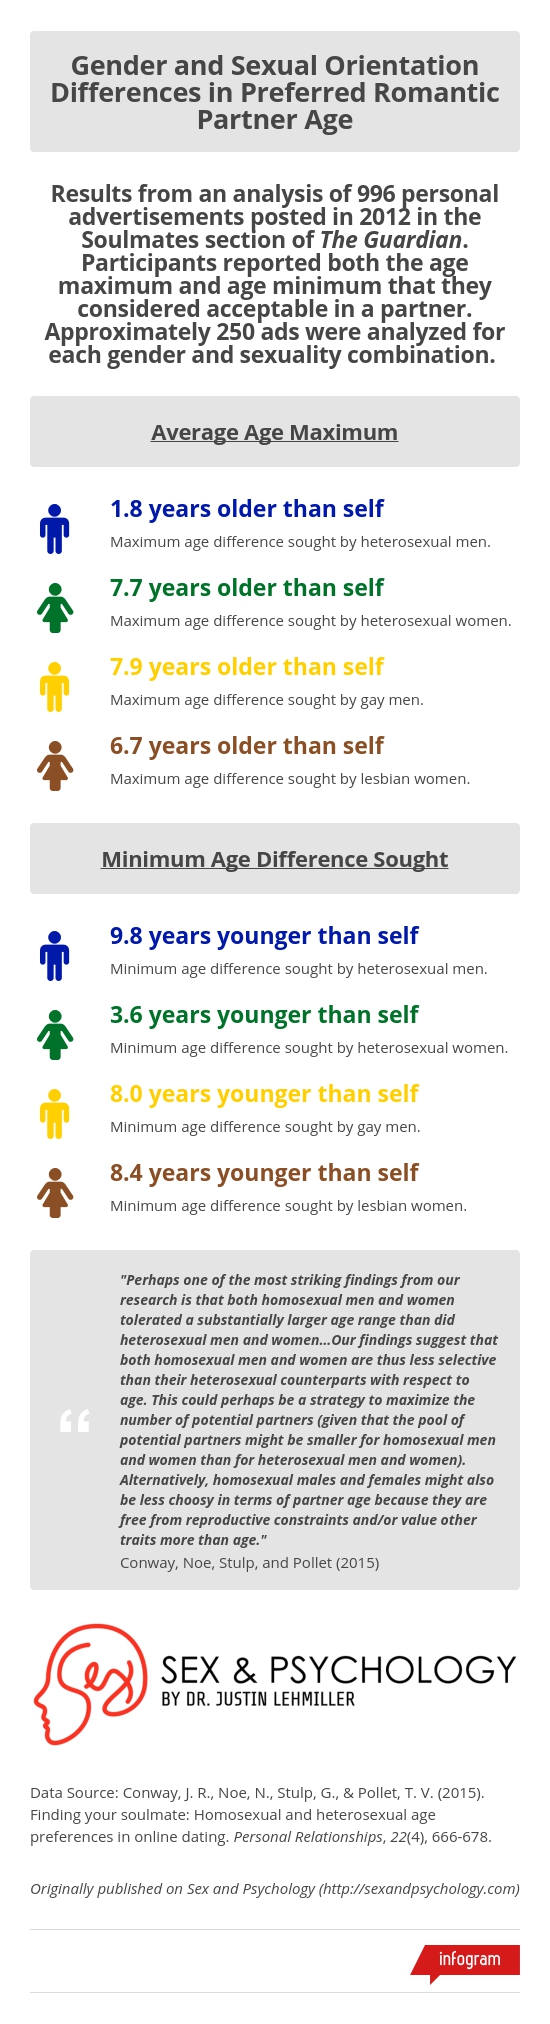 infographic-age-preferences-gender-sexuality.jpg